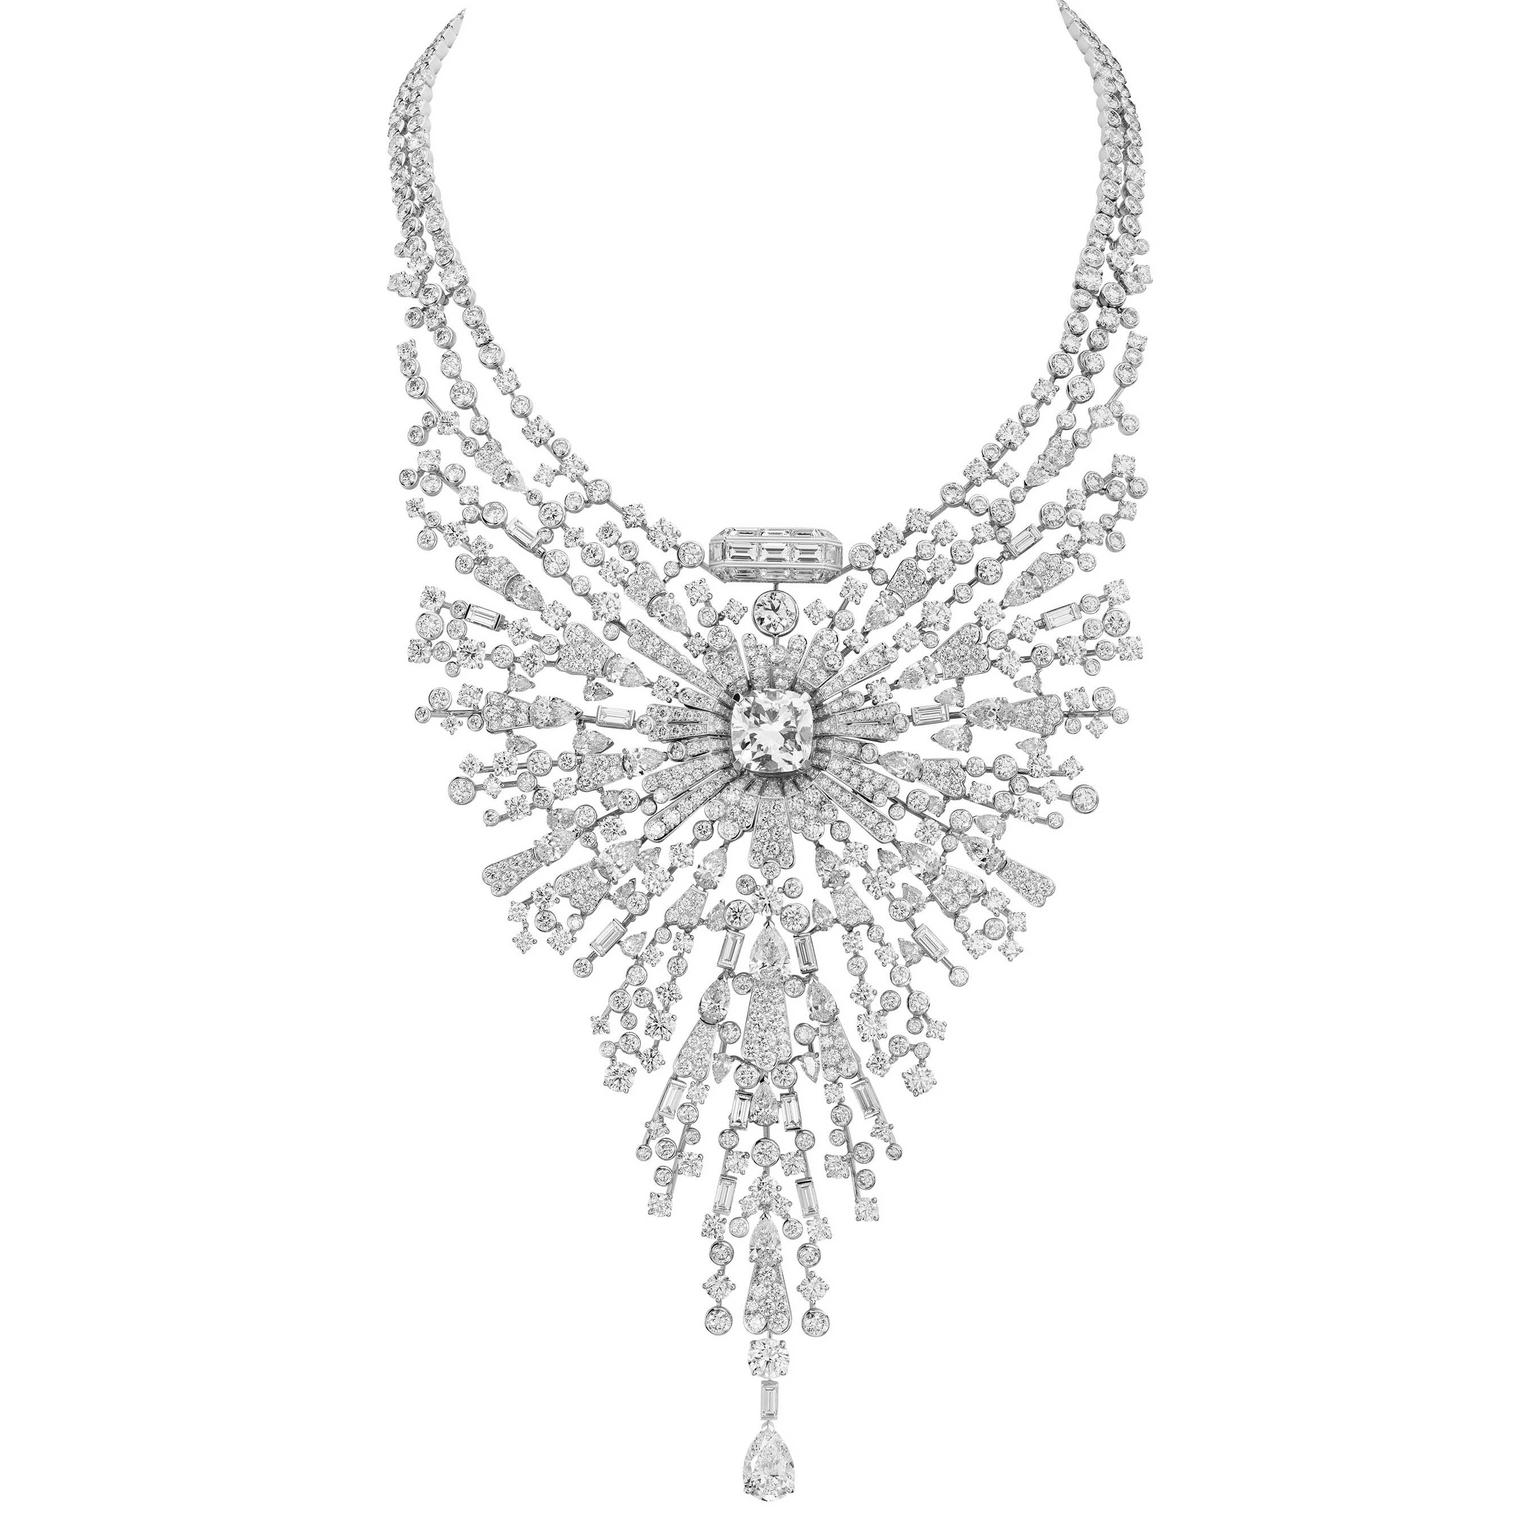 The Flowers - N°5 Collection - High Jewelry